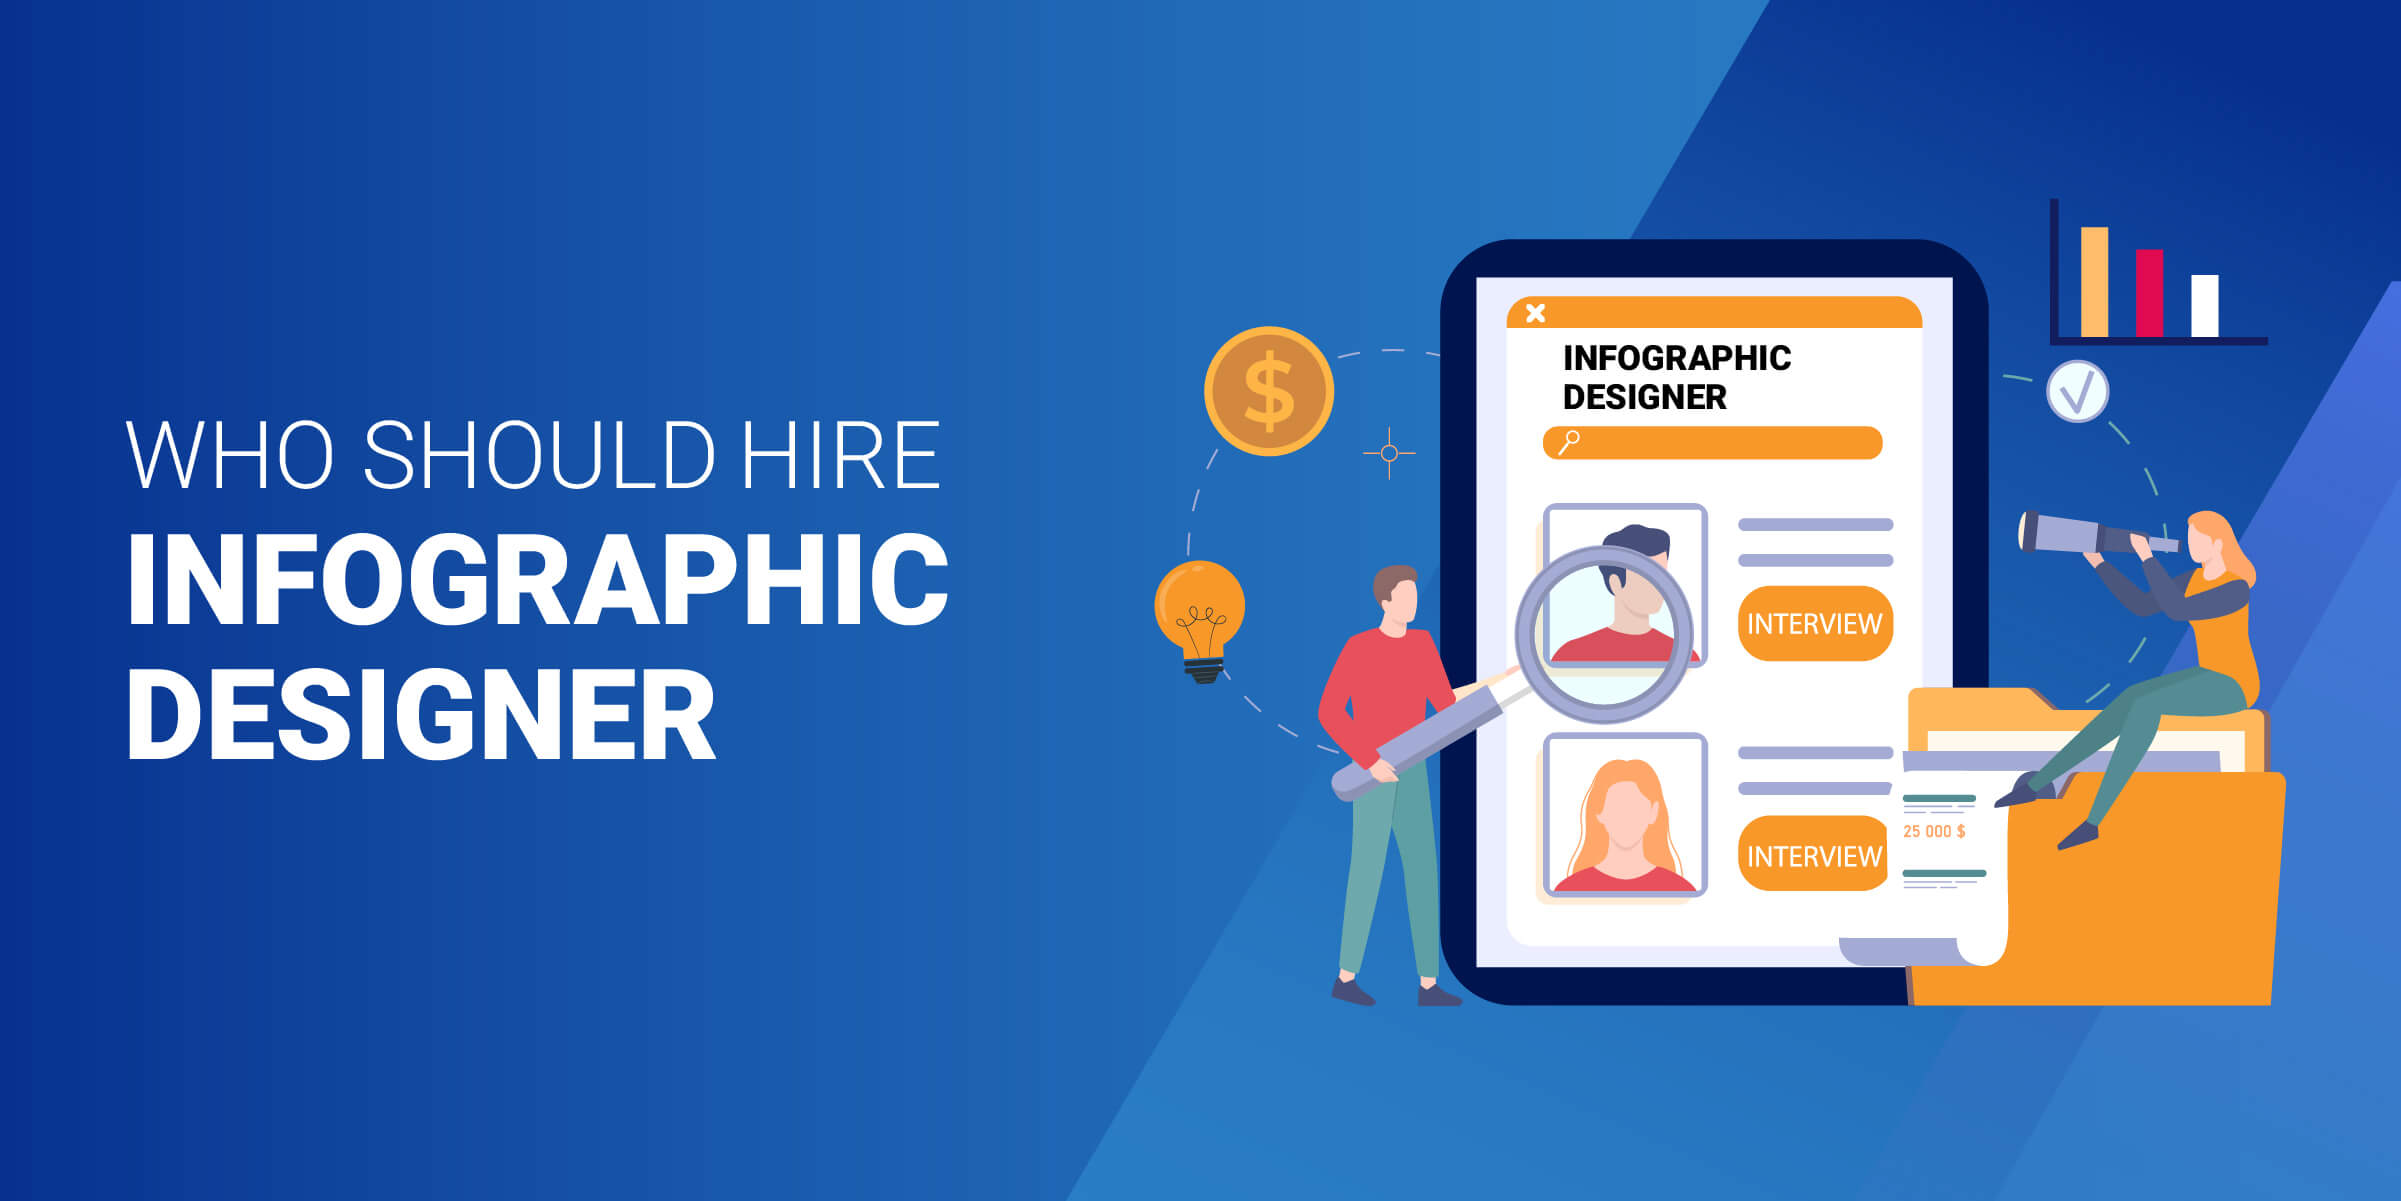 Who Should Hire Infographic Designer